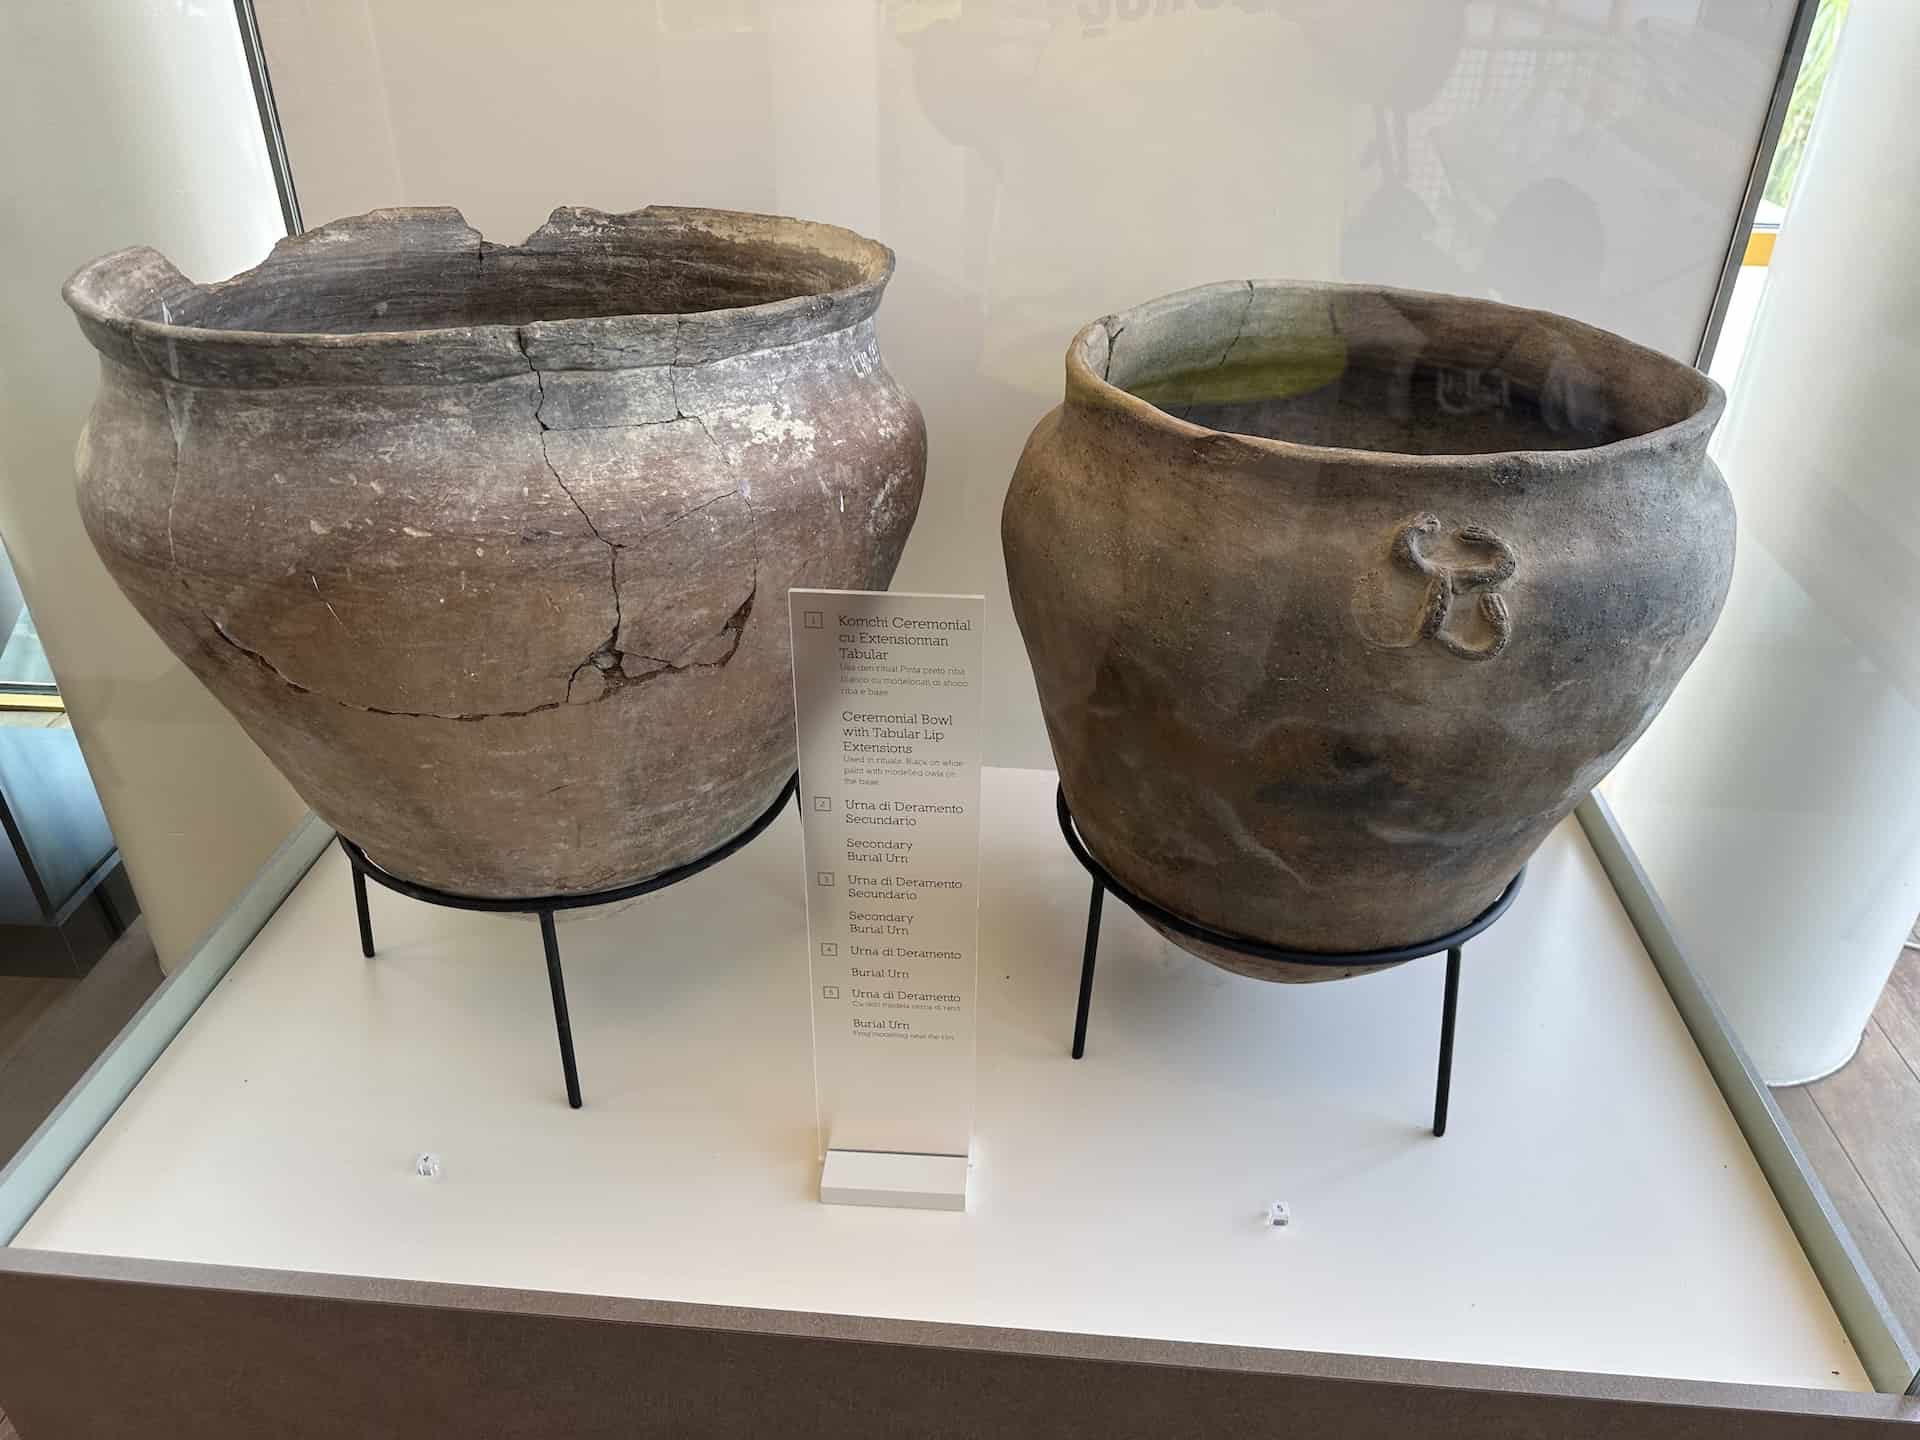 Burial urns at the National Archaeological Museum in Oranjestad, Aruba